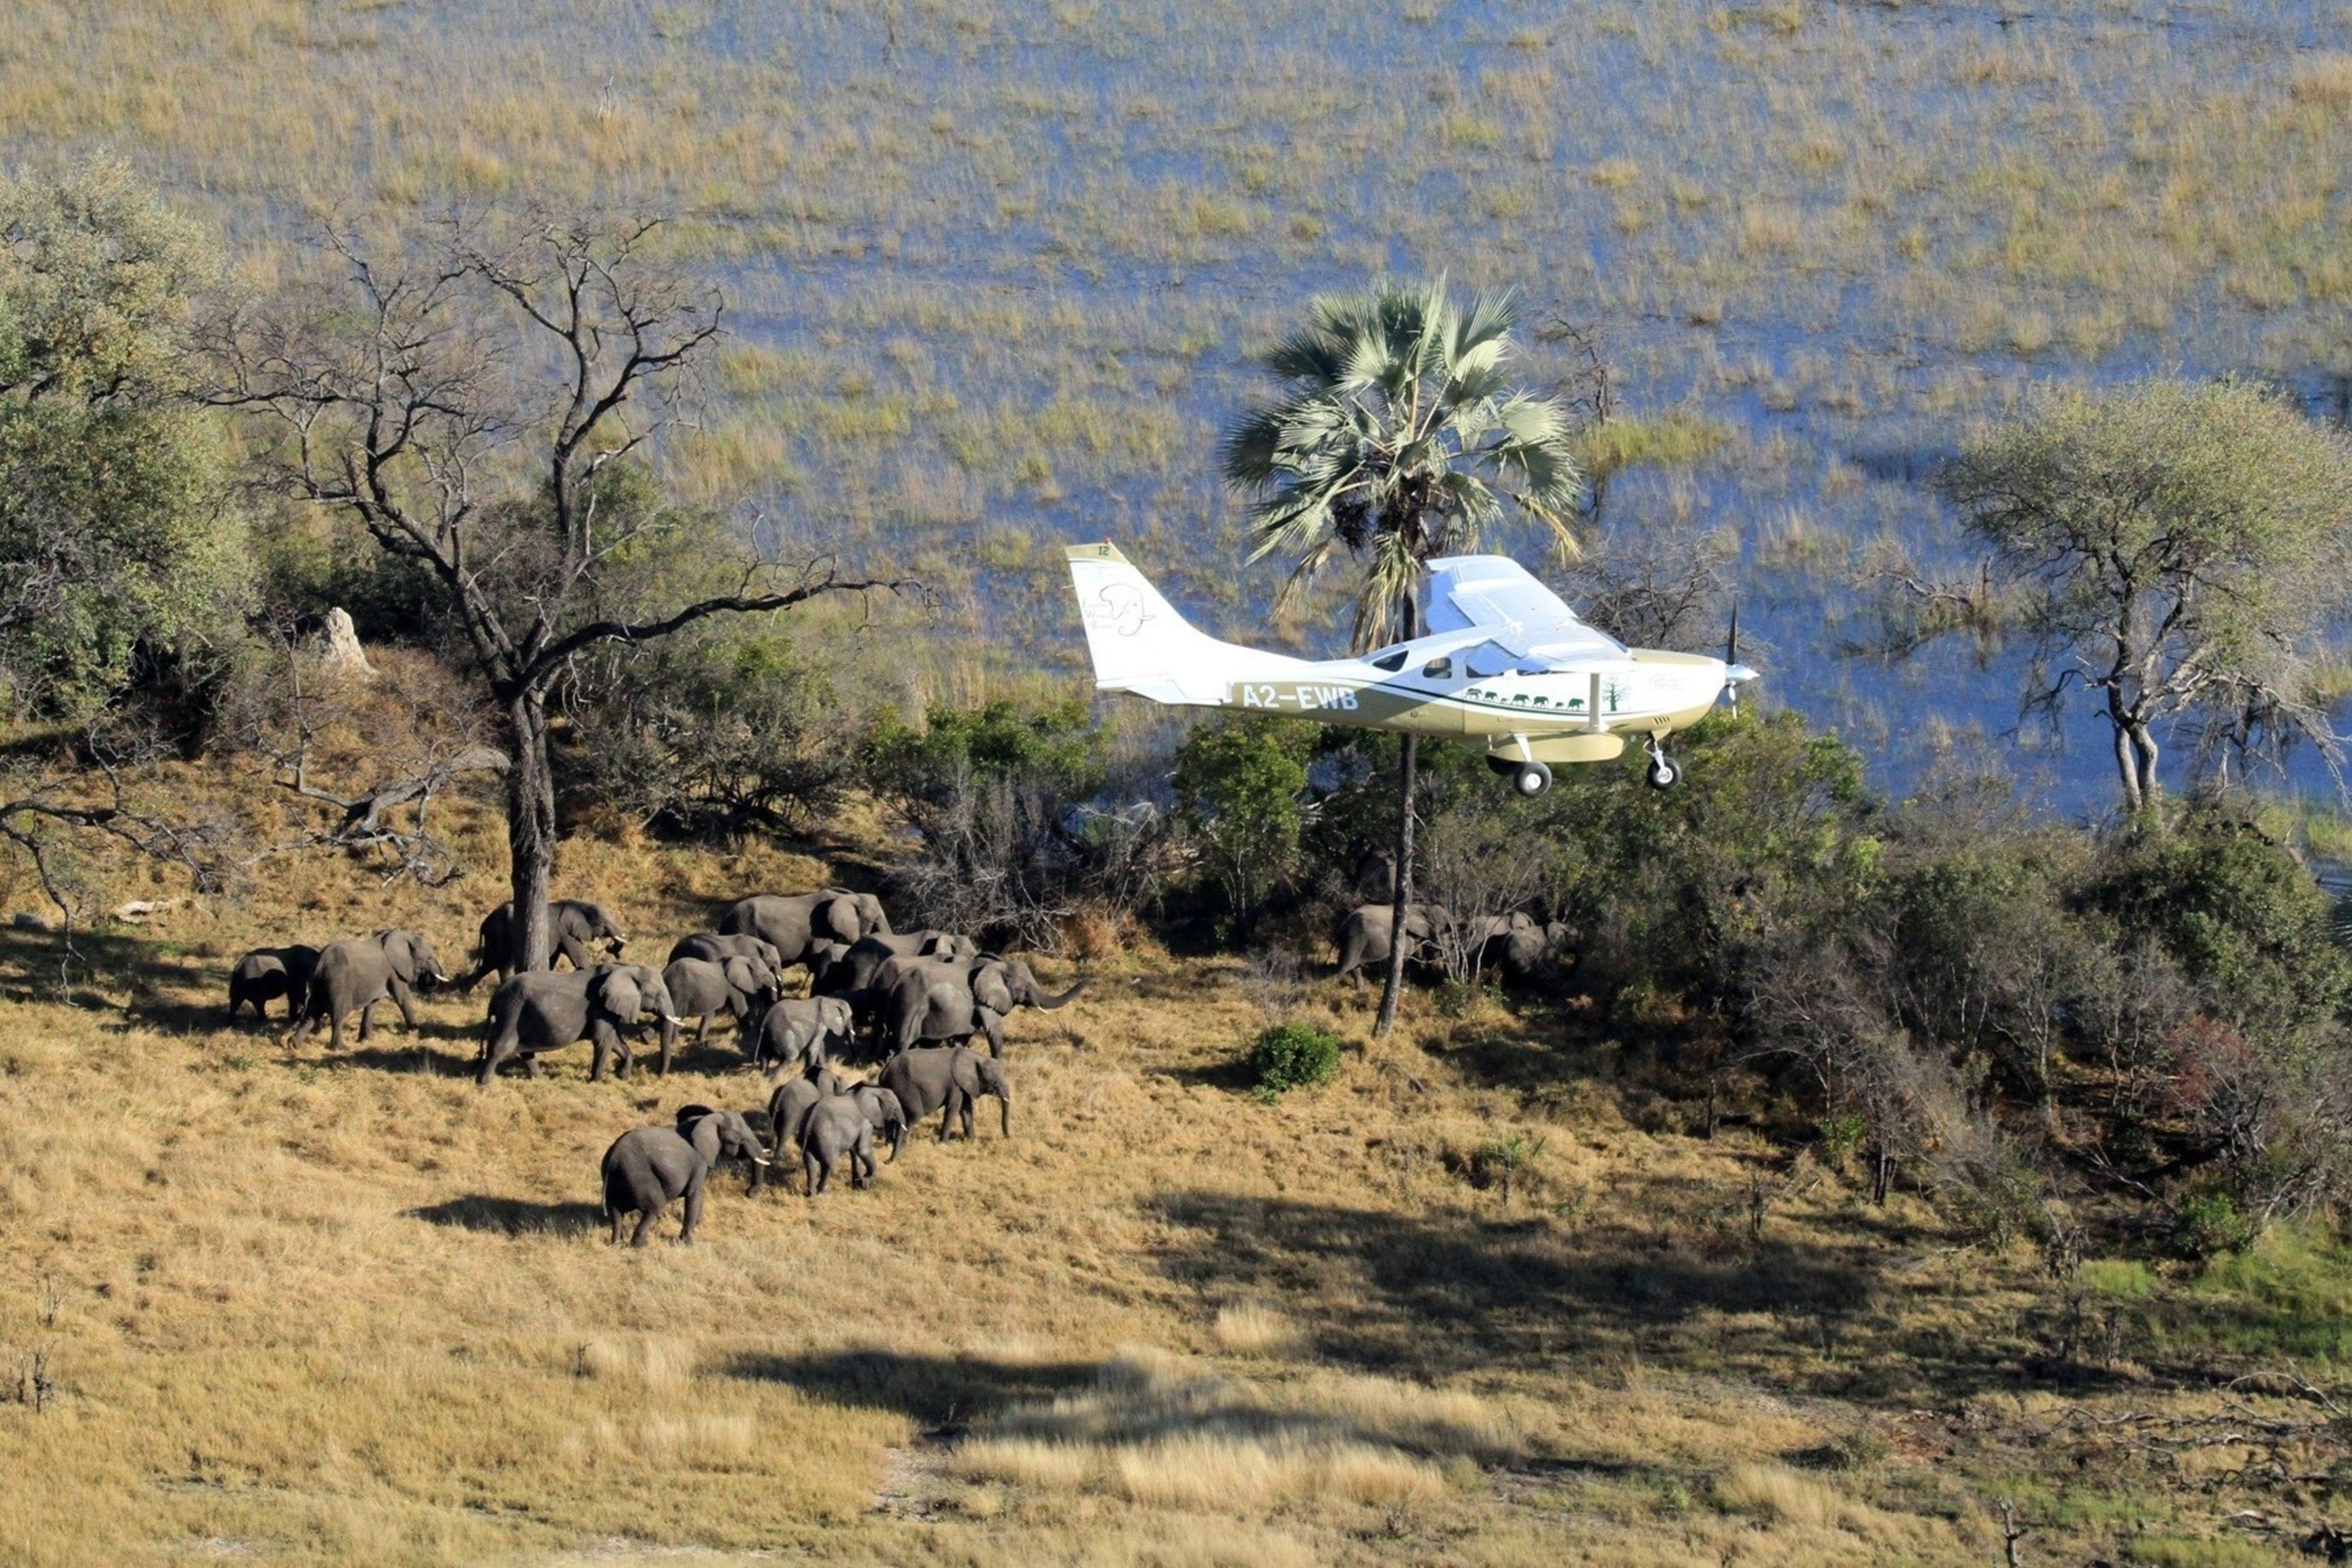 The Elephants Without Borders team flew GEC surveys in their home country of Botswana, which is also home to Africa's largest elephant population with an estimated 130,451 elephants according to the Census. Dr. Mike Chase, founder of EWB, was the principal investigator of the Great Elephant Census. (Photo credit: Great Elephant Census)